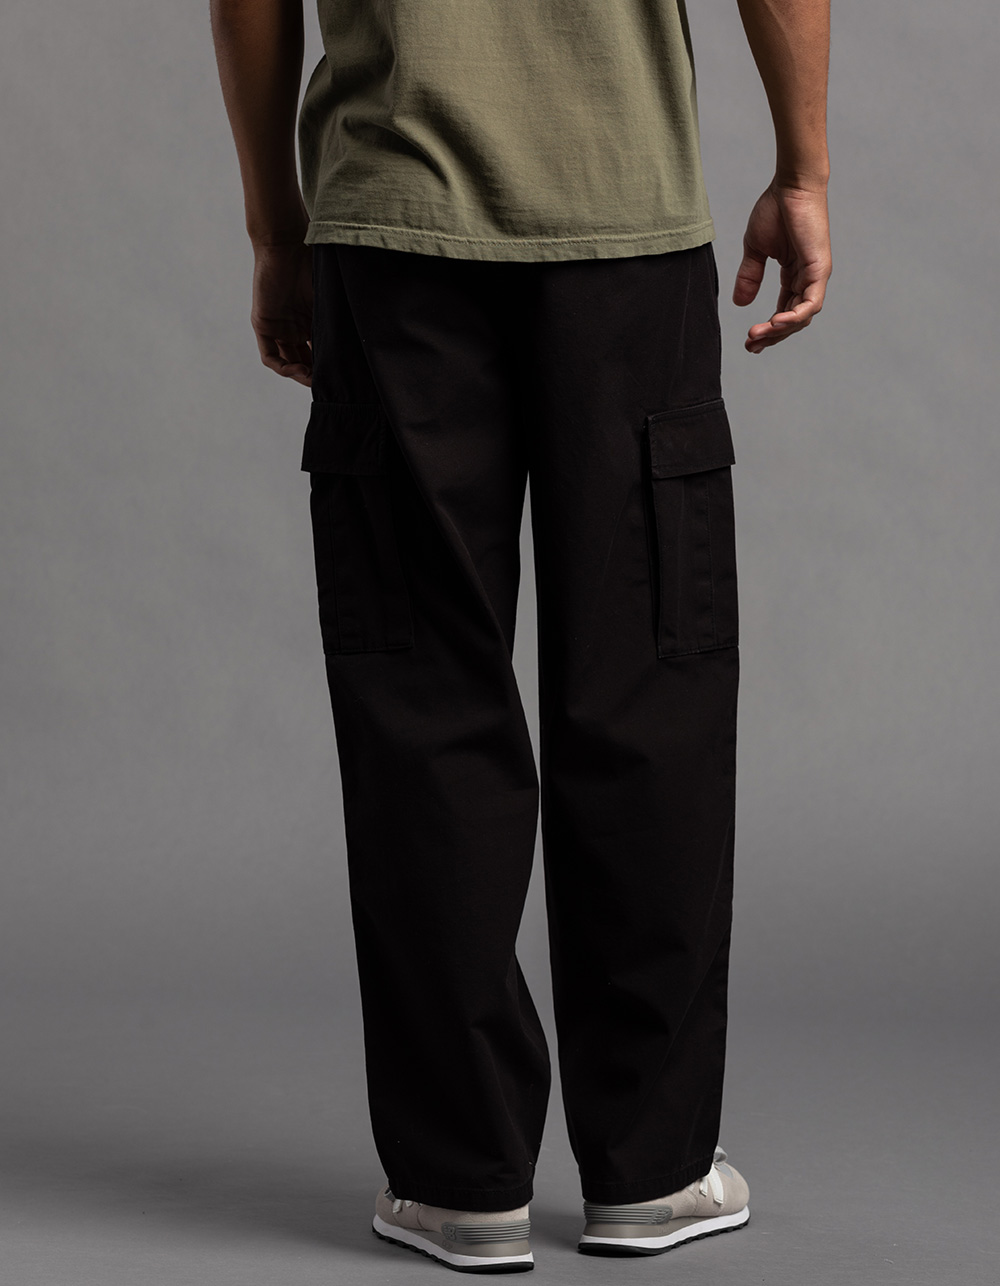 RSQ Mens Loose Cargo Pants - WASHED BLACK